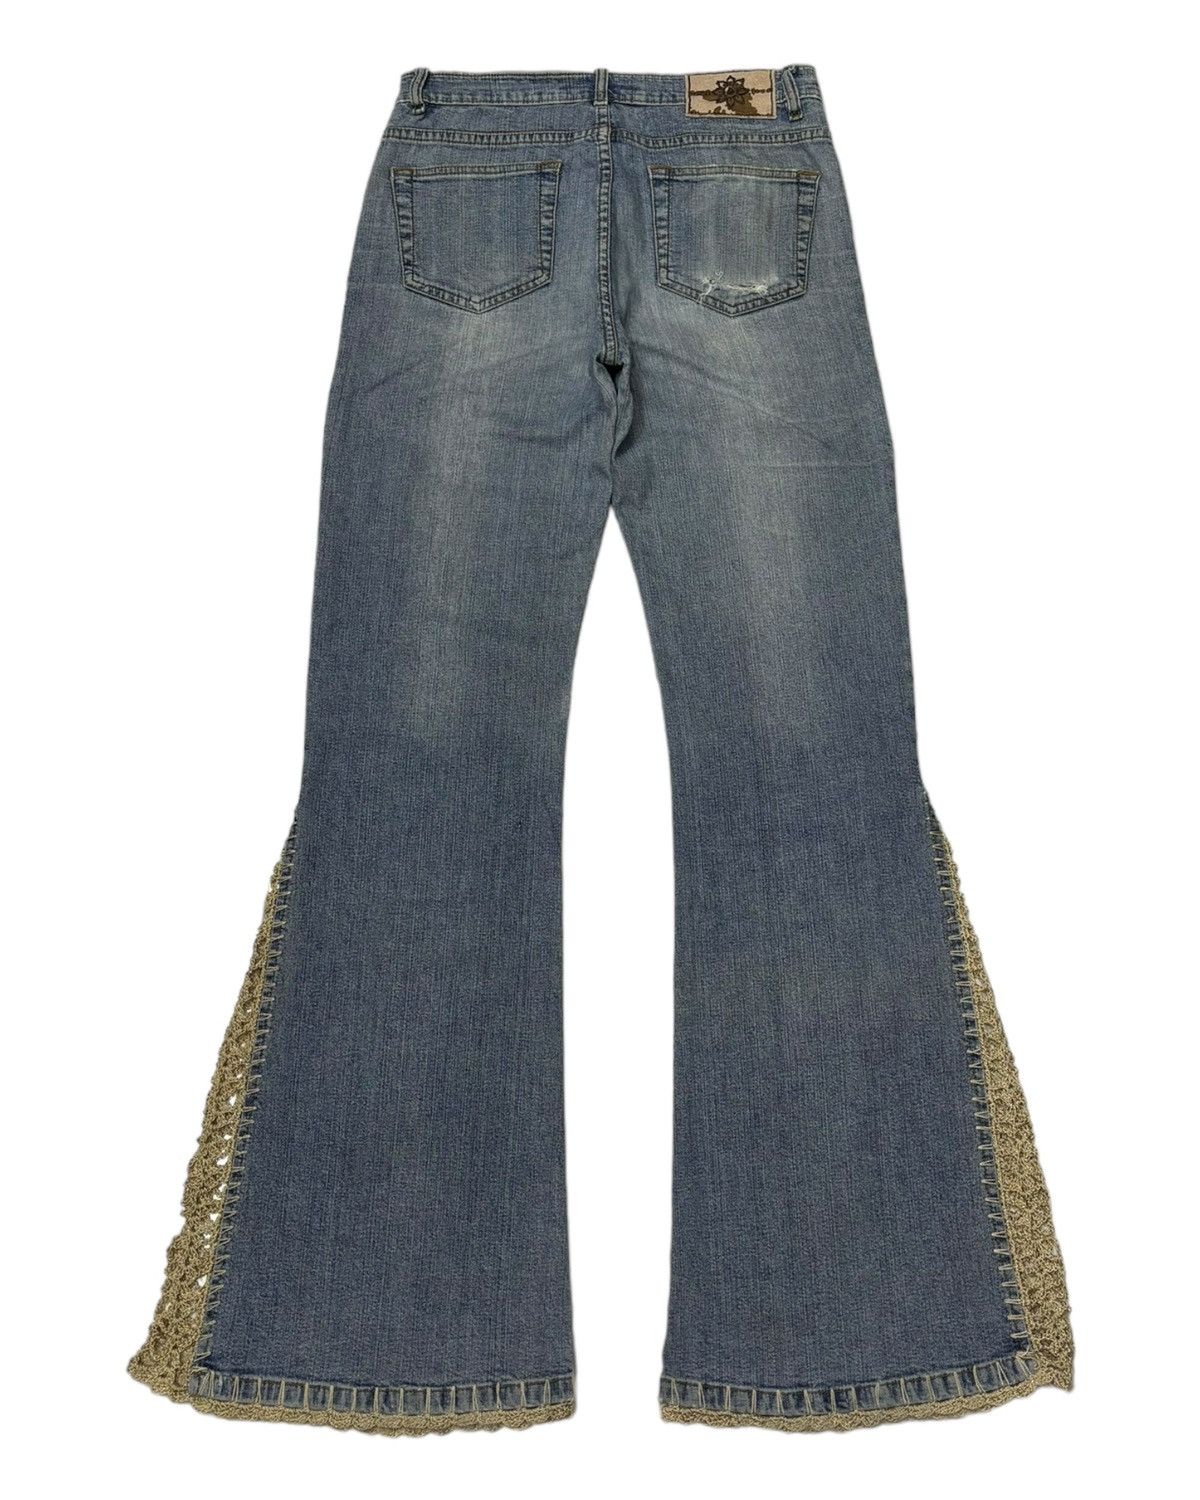 Designer - Vintage Flared Jeans Toco Toco Crochet Bootcut Jeans - 2